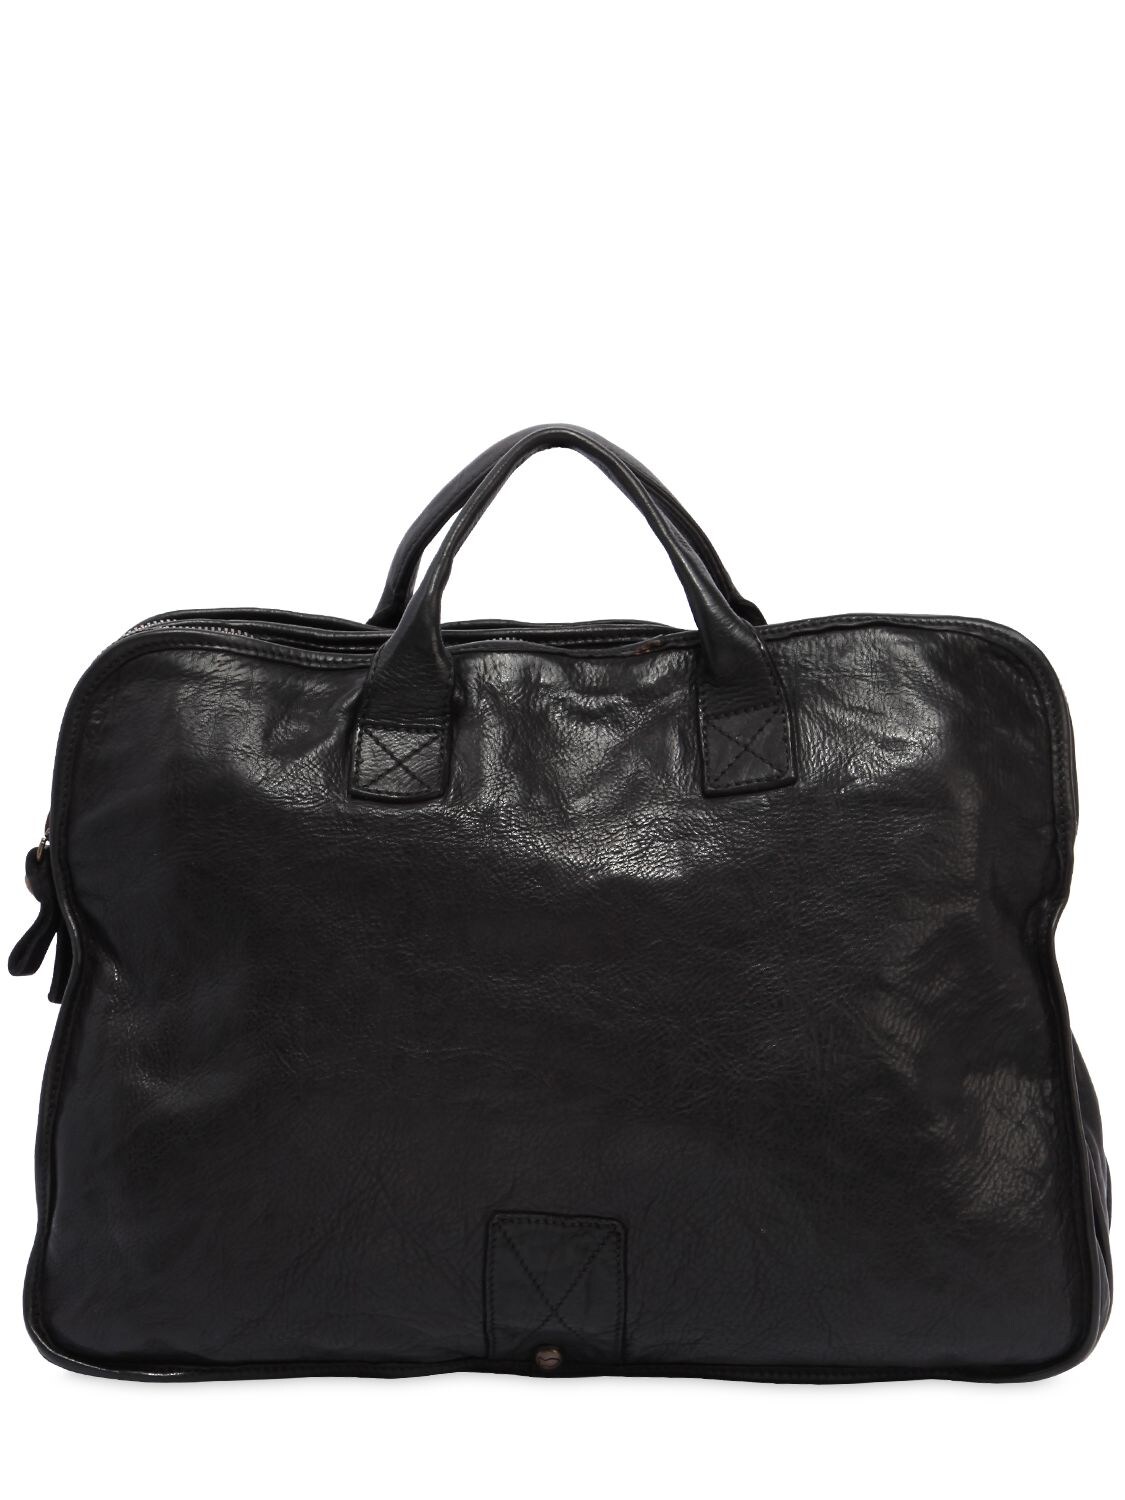 Campomaggi Vintage Effect Leather Briefcase In Black